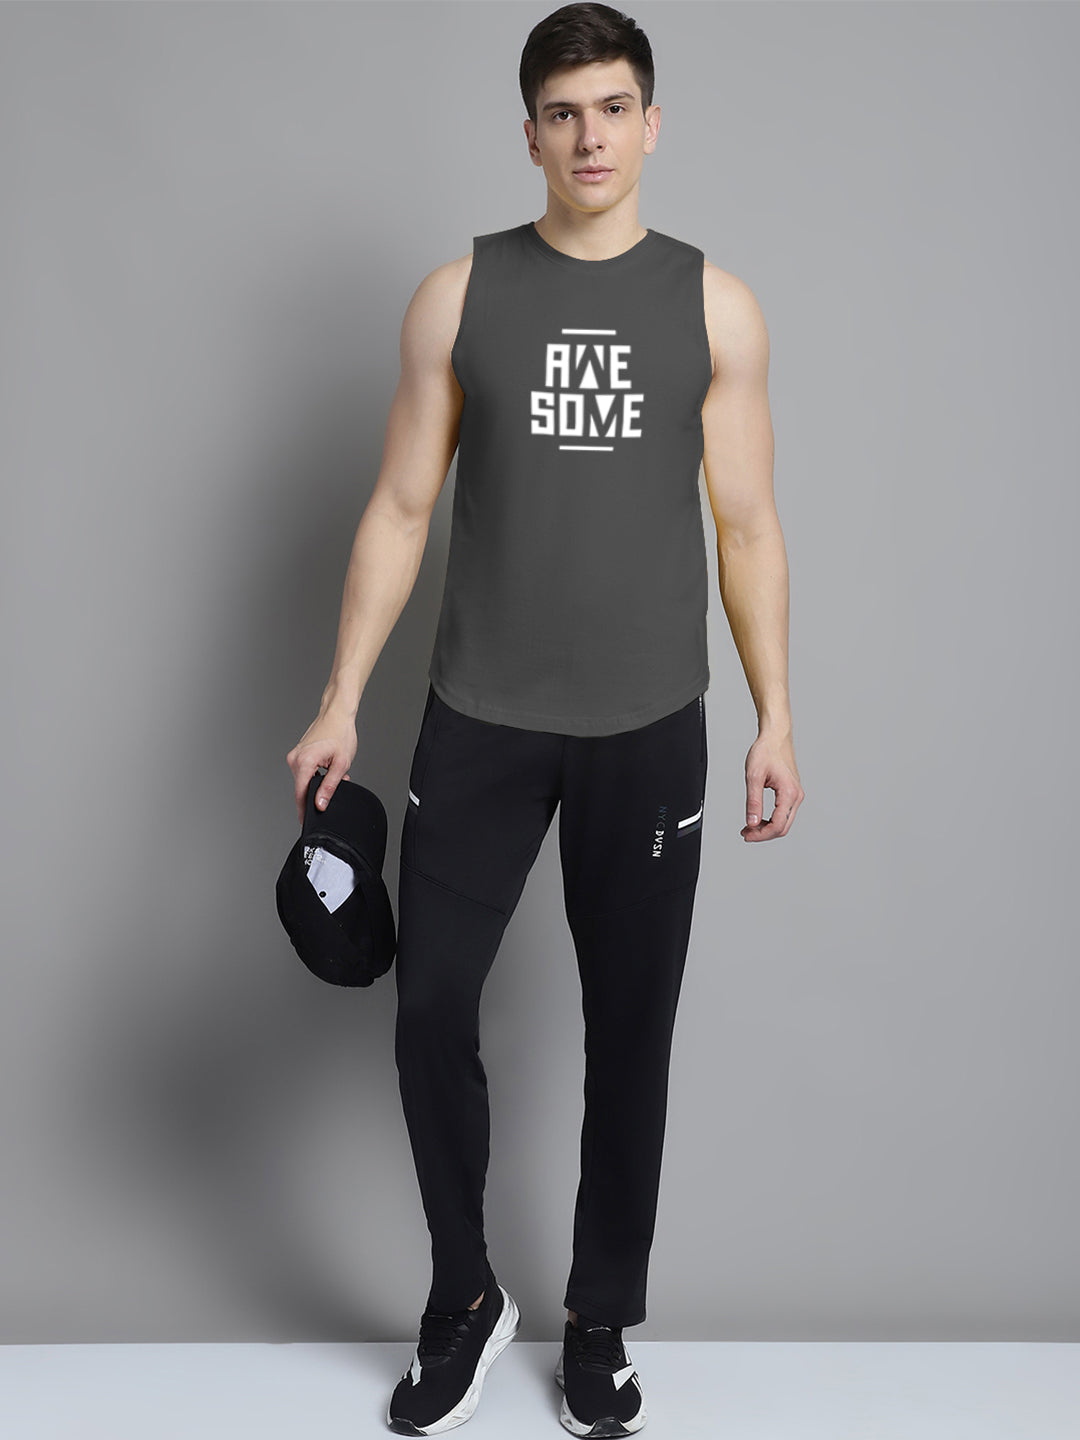 Fbar Awesome printed Pure Cotton Training Vest - Friskers